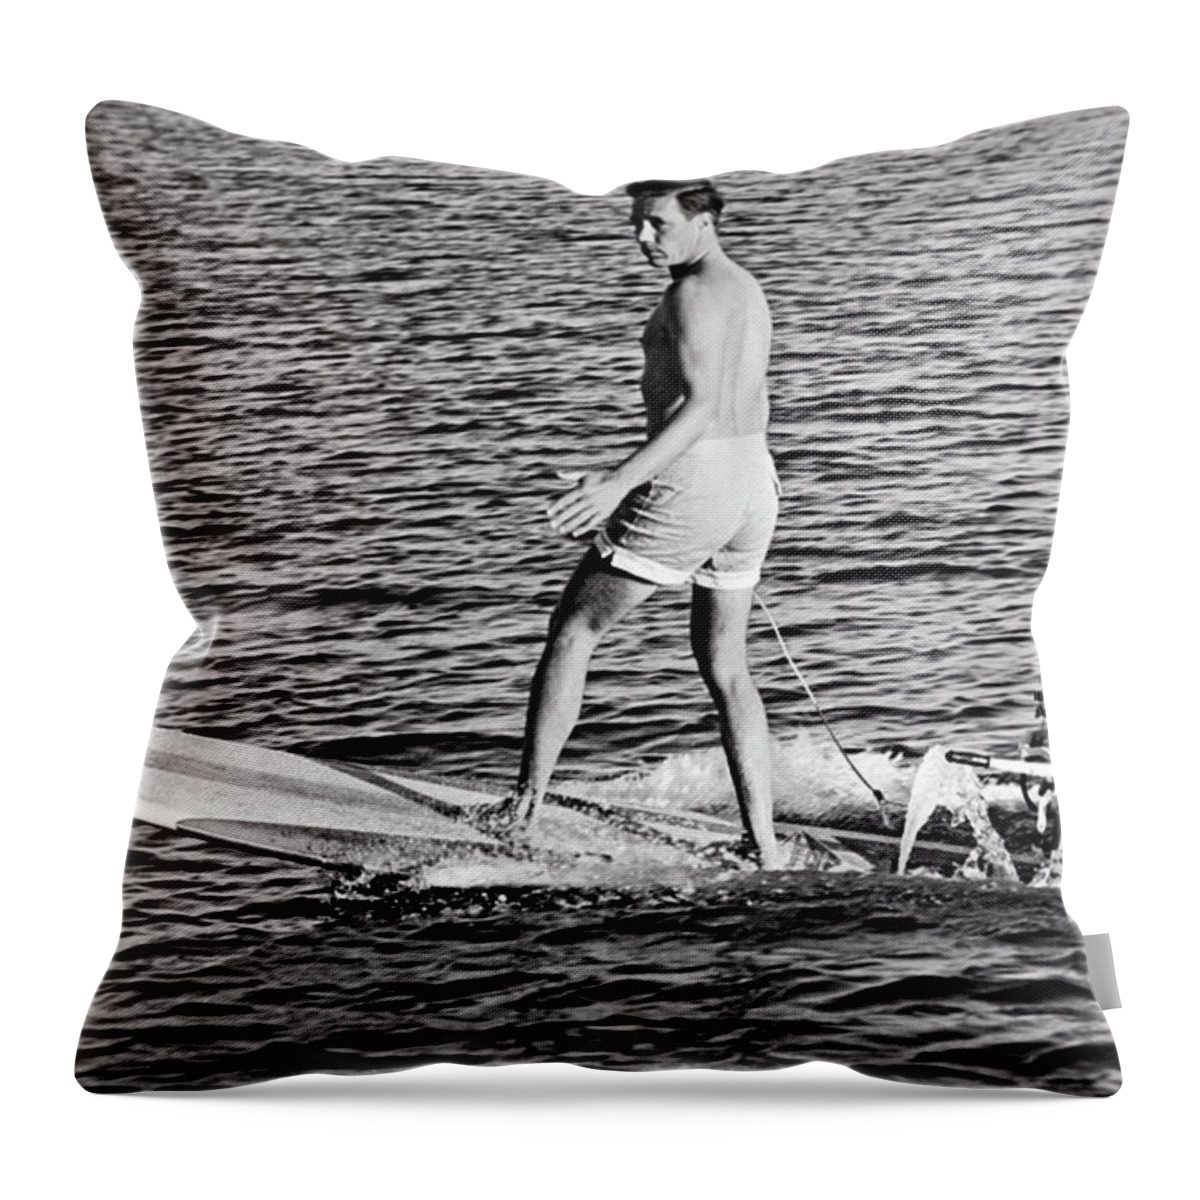 1960 Throw Pillow featuring the photograph Hobie Alter Surfboard Motor by Underwood Archives